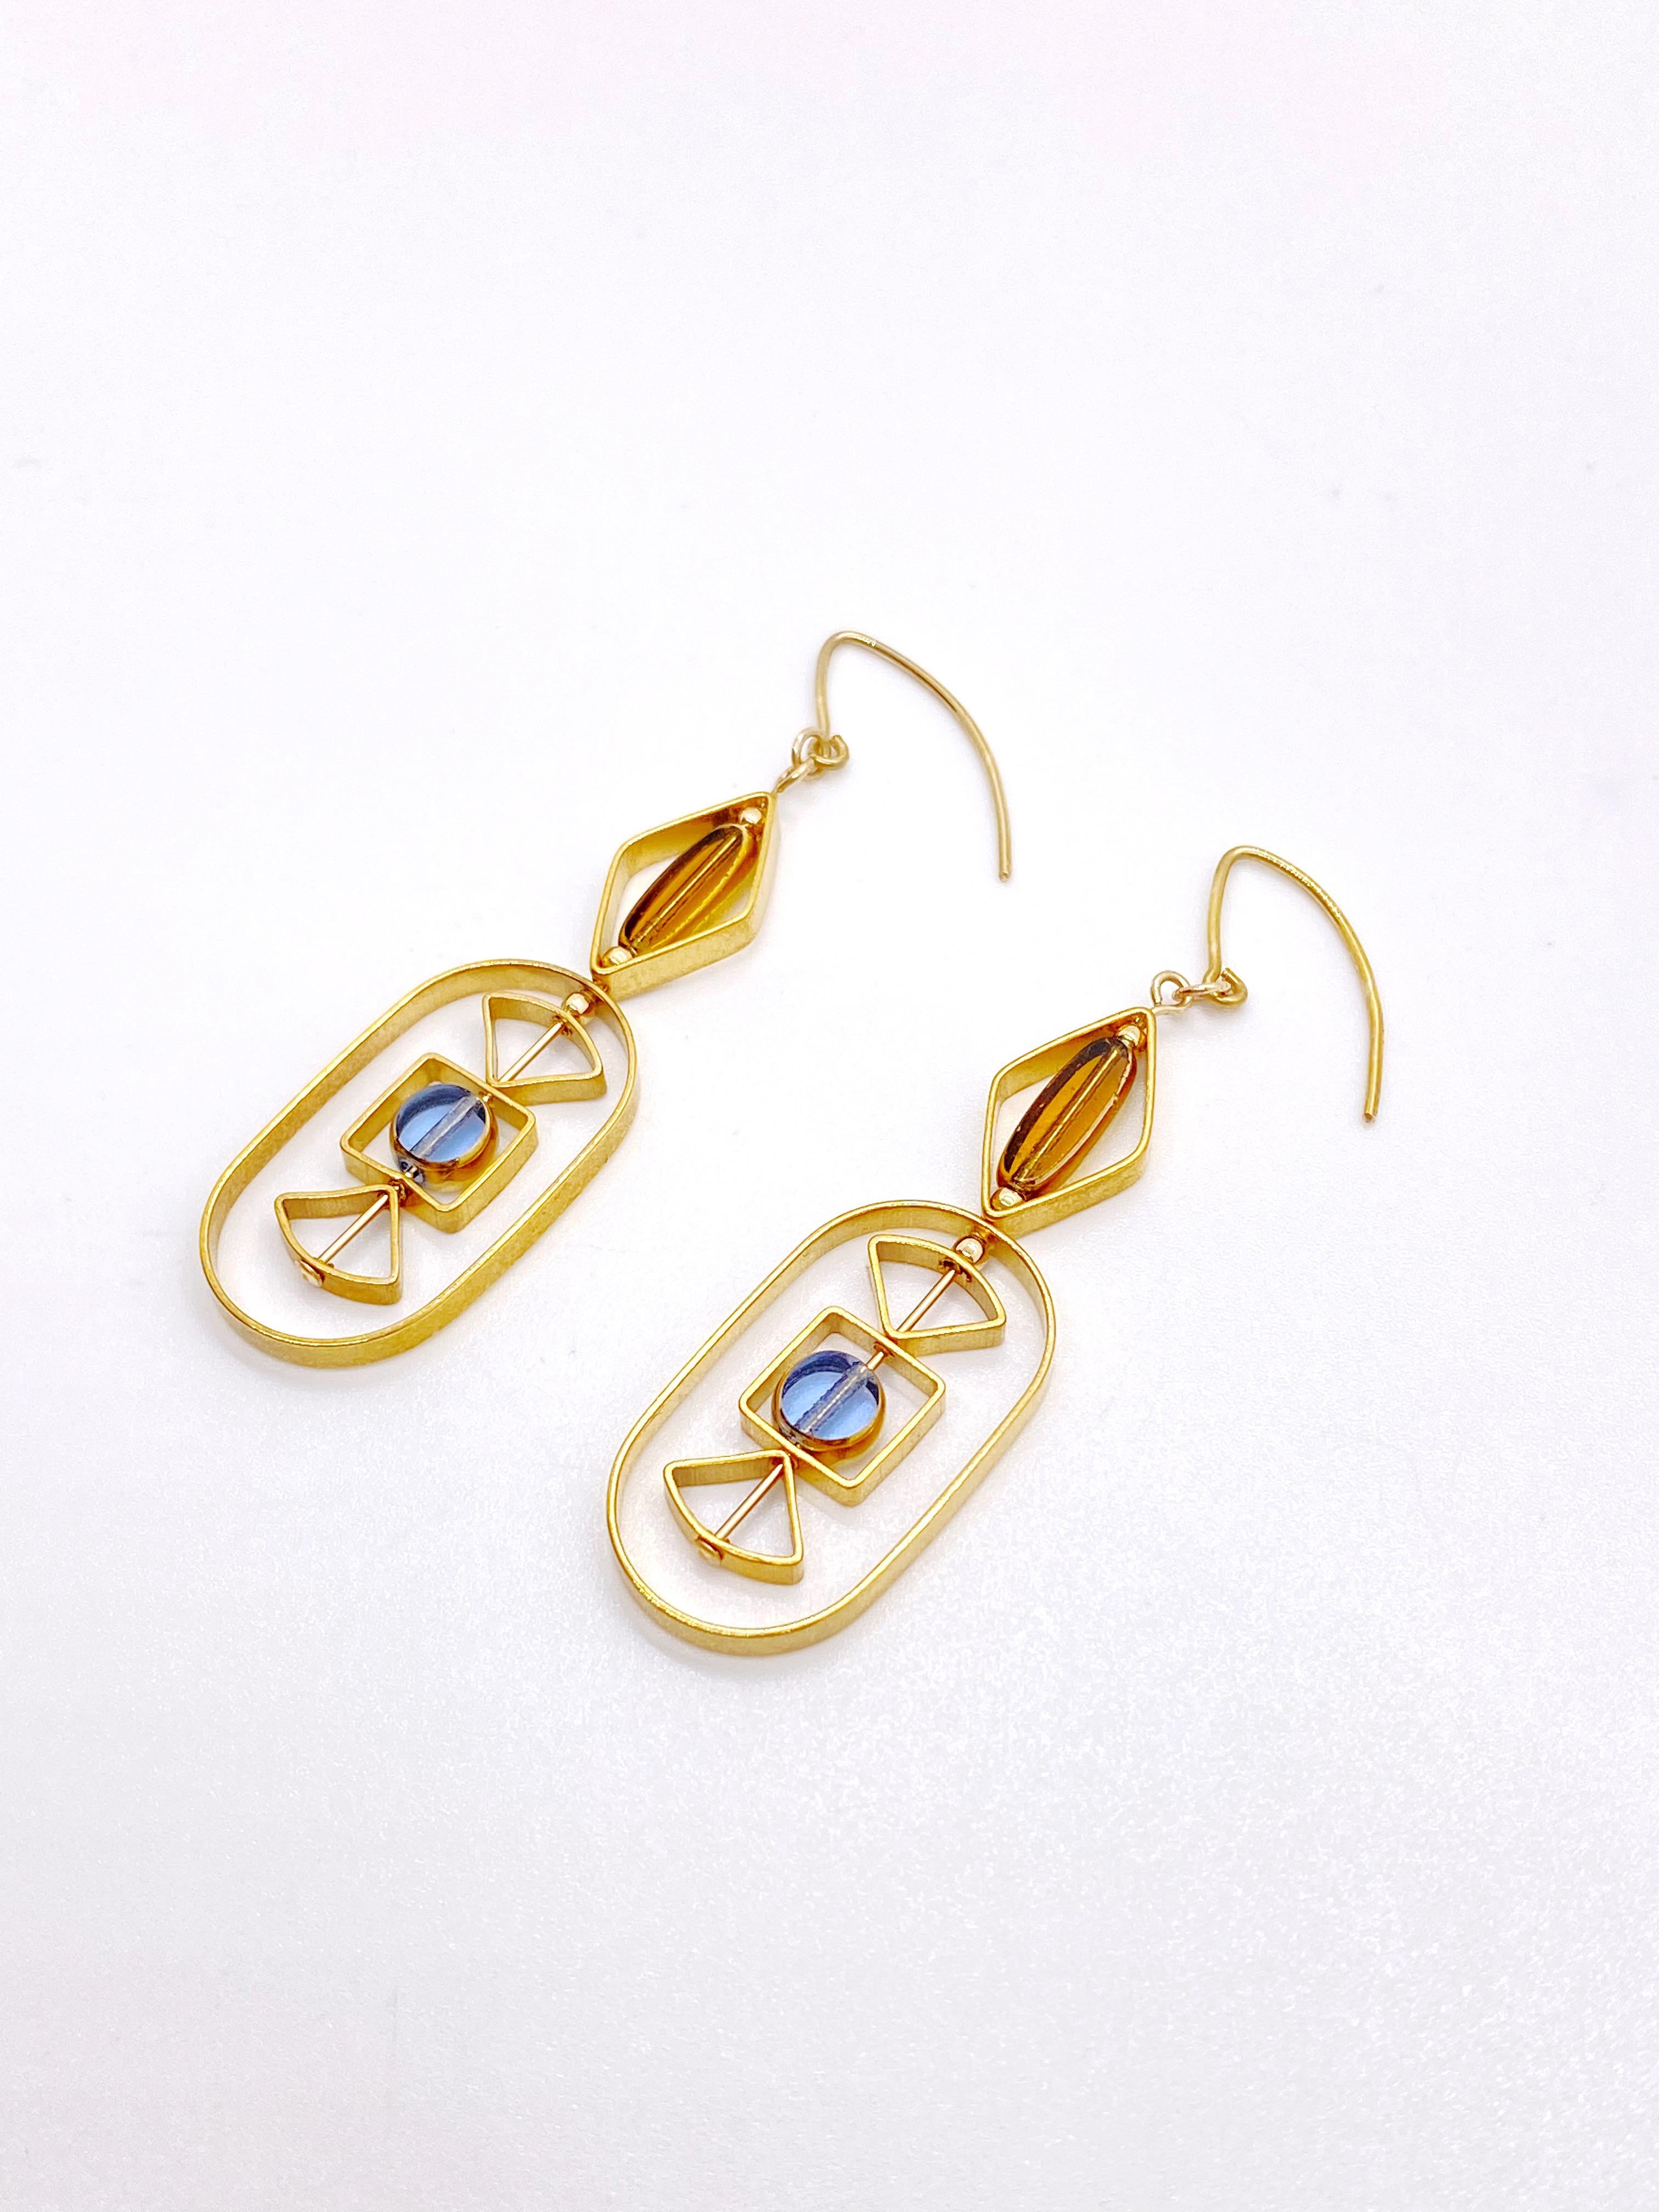 This is for a set of earrings. The earrings consist of  1 mini blue circle and 1 mini oblong shaped transparent beads. They are new old stock vintage German glass beads that are framed with 24K gold. The beads were hand pressed during the